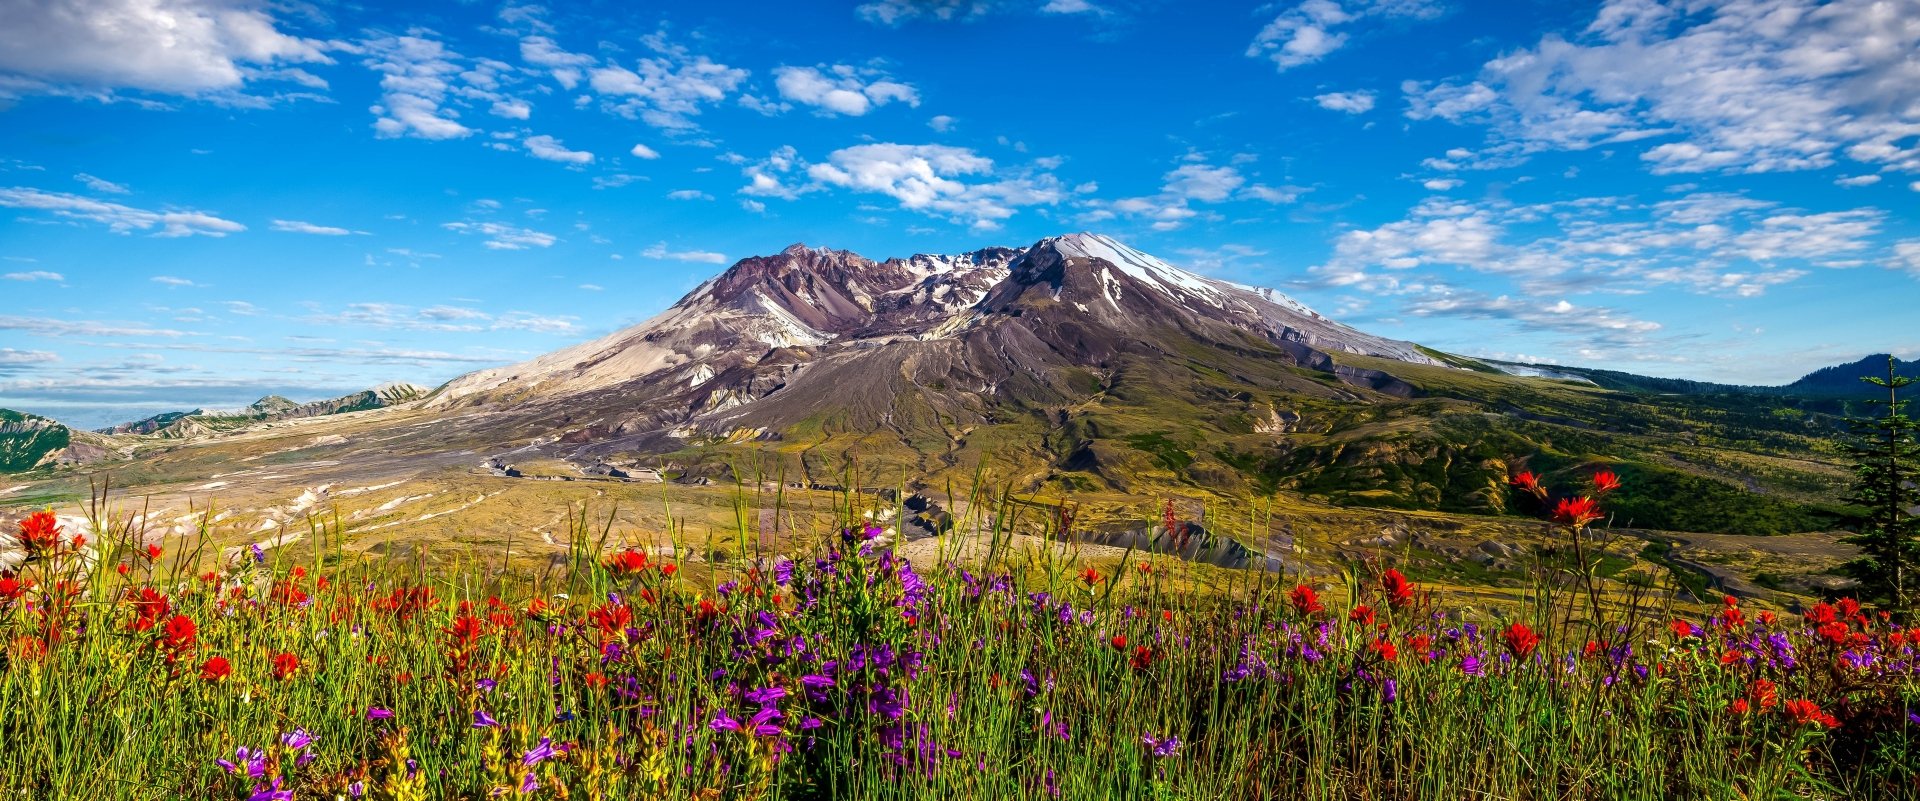 Mount st helens hd papers and backgrounds